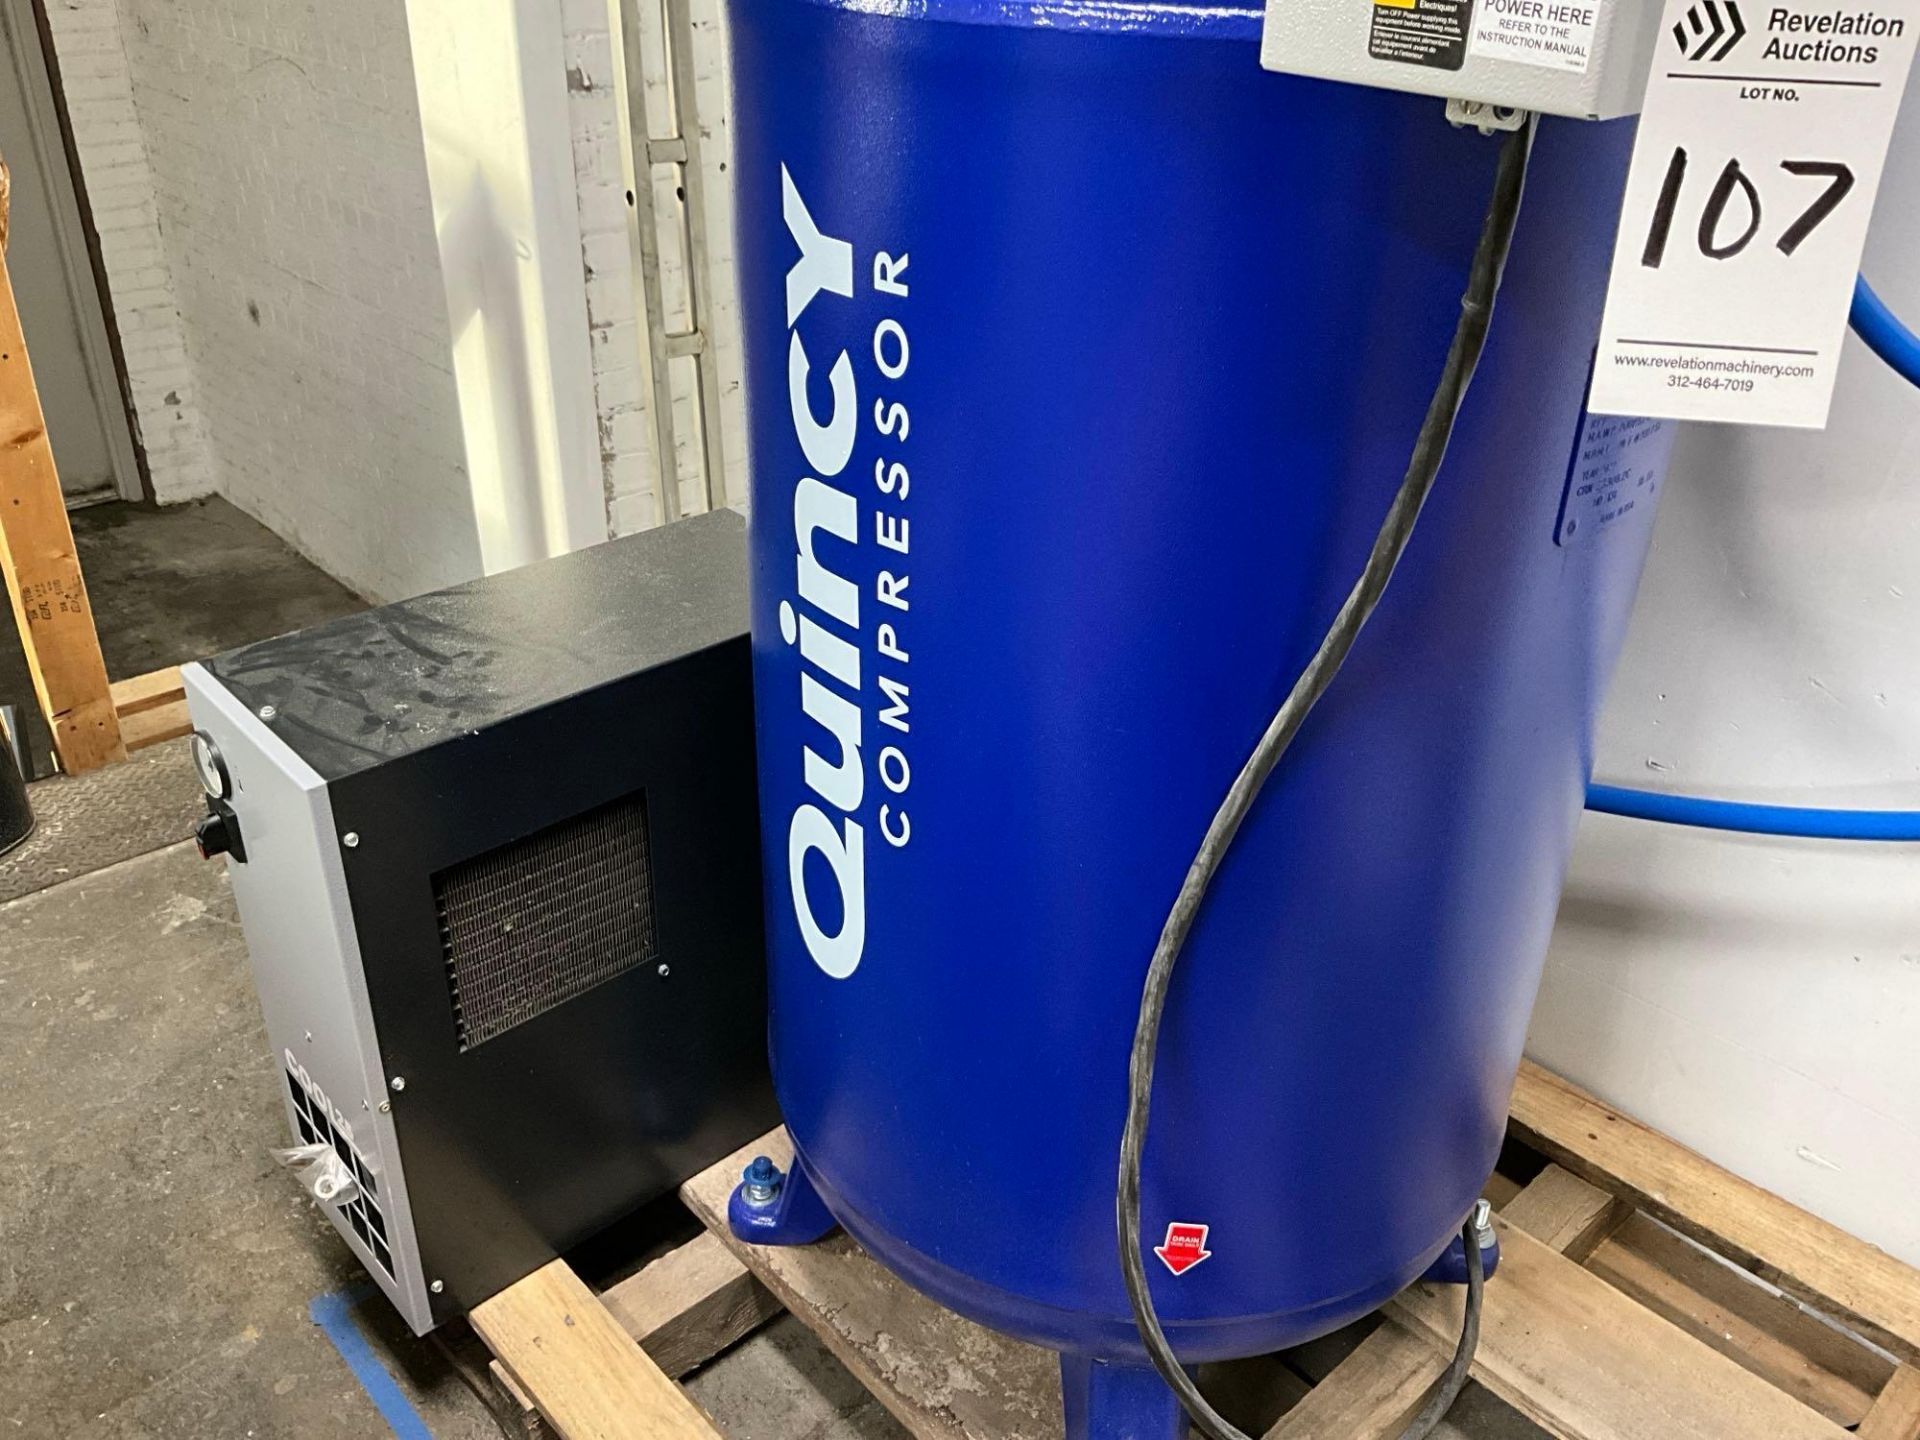 QUINCY 7 1/2 HP 80 GALLON COMPRESSOR WITH COOL 25 REFRIGERATED AIR DRYER - Image 7 of 13